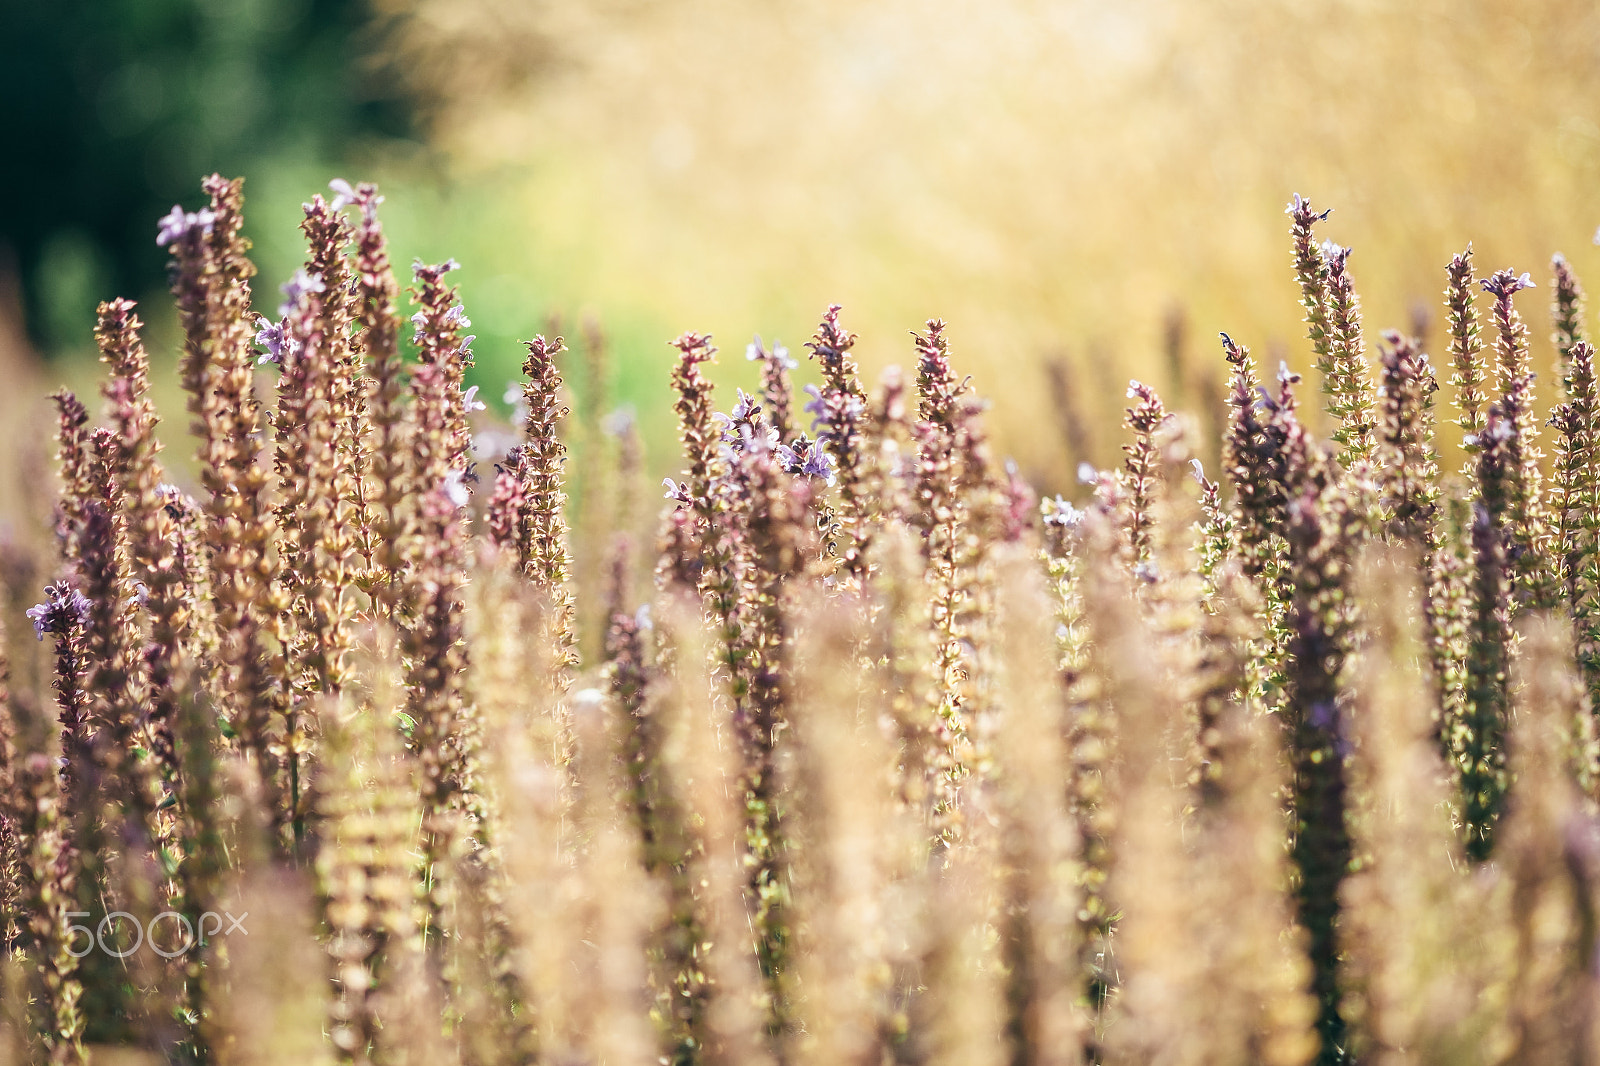 Fujifilm X-E2 + Fujifilm XF 60mm F2.4 R Macro sample photo. Beautiful purple flowers and dry gold oats in meadow with soft focus, summer nature background photography